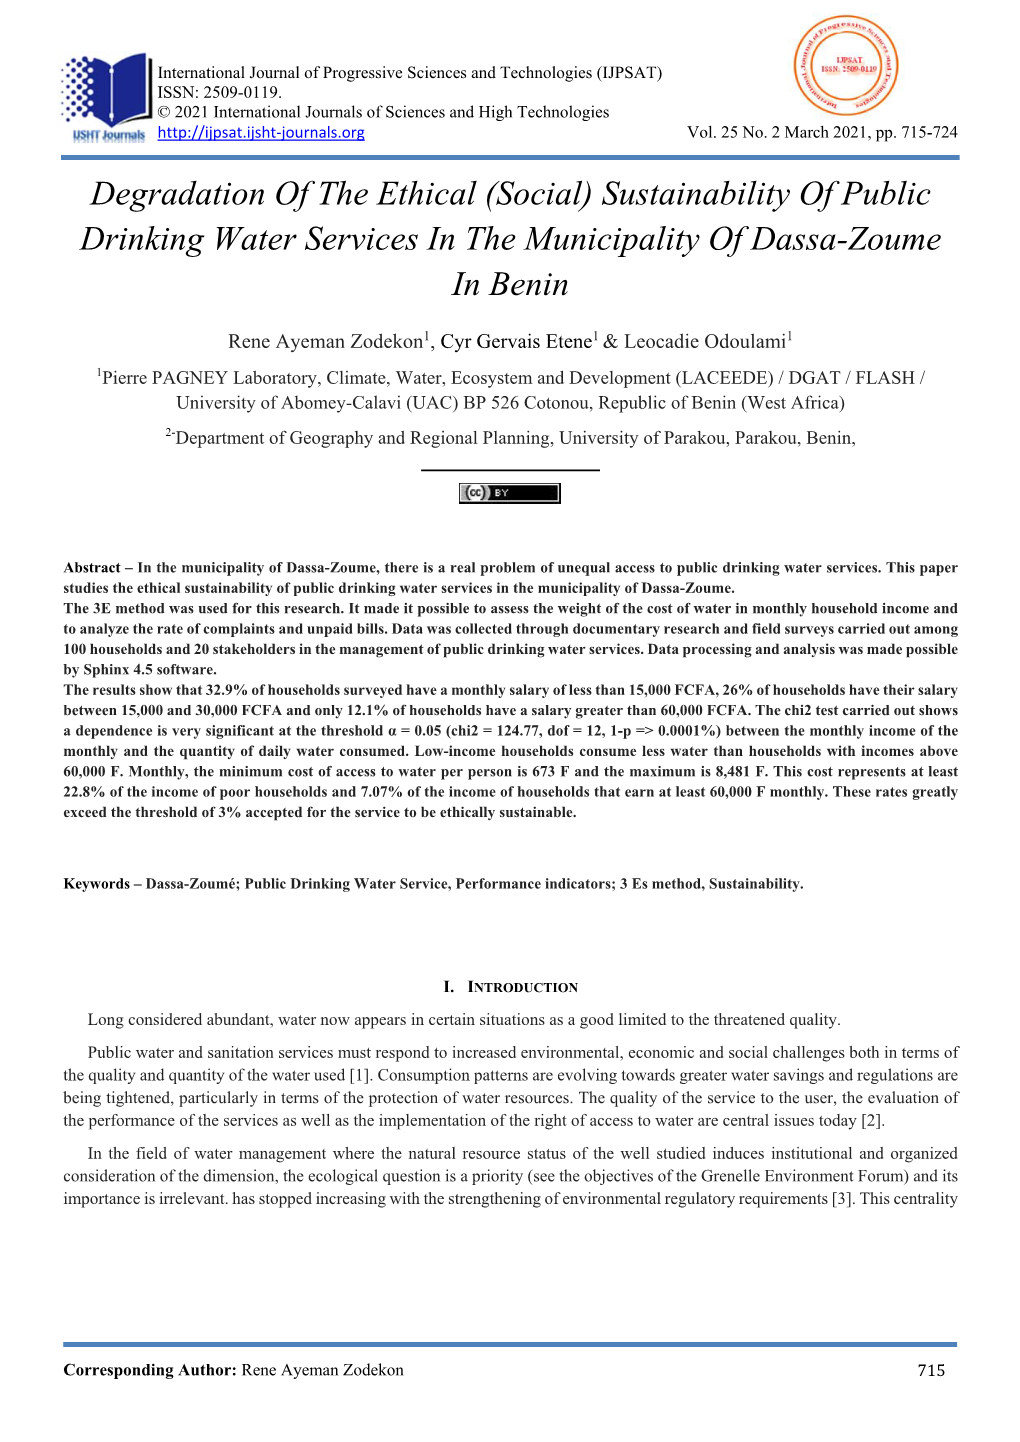 (Social) Sustainability of Public Drinking Water Services in the Municipality of Dassa-Zoume in Benin